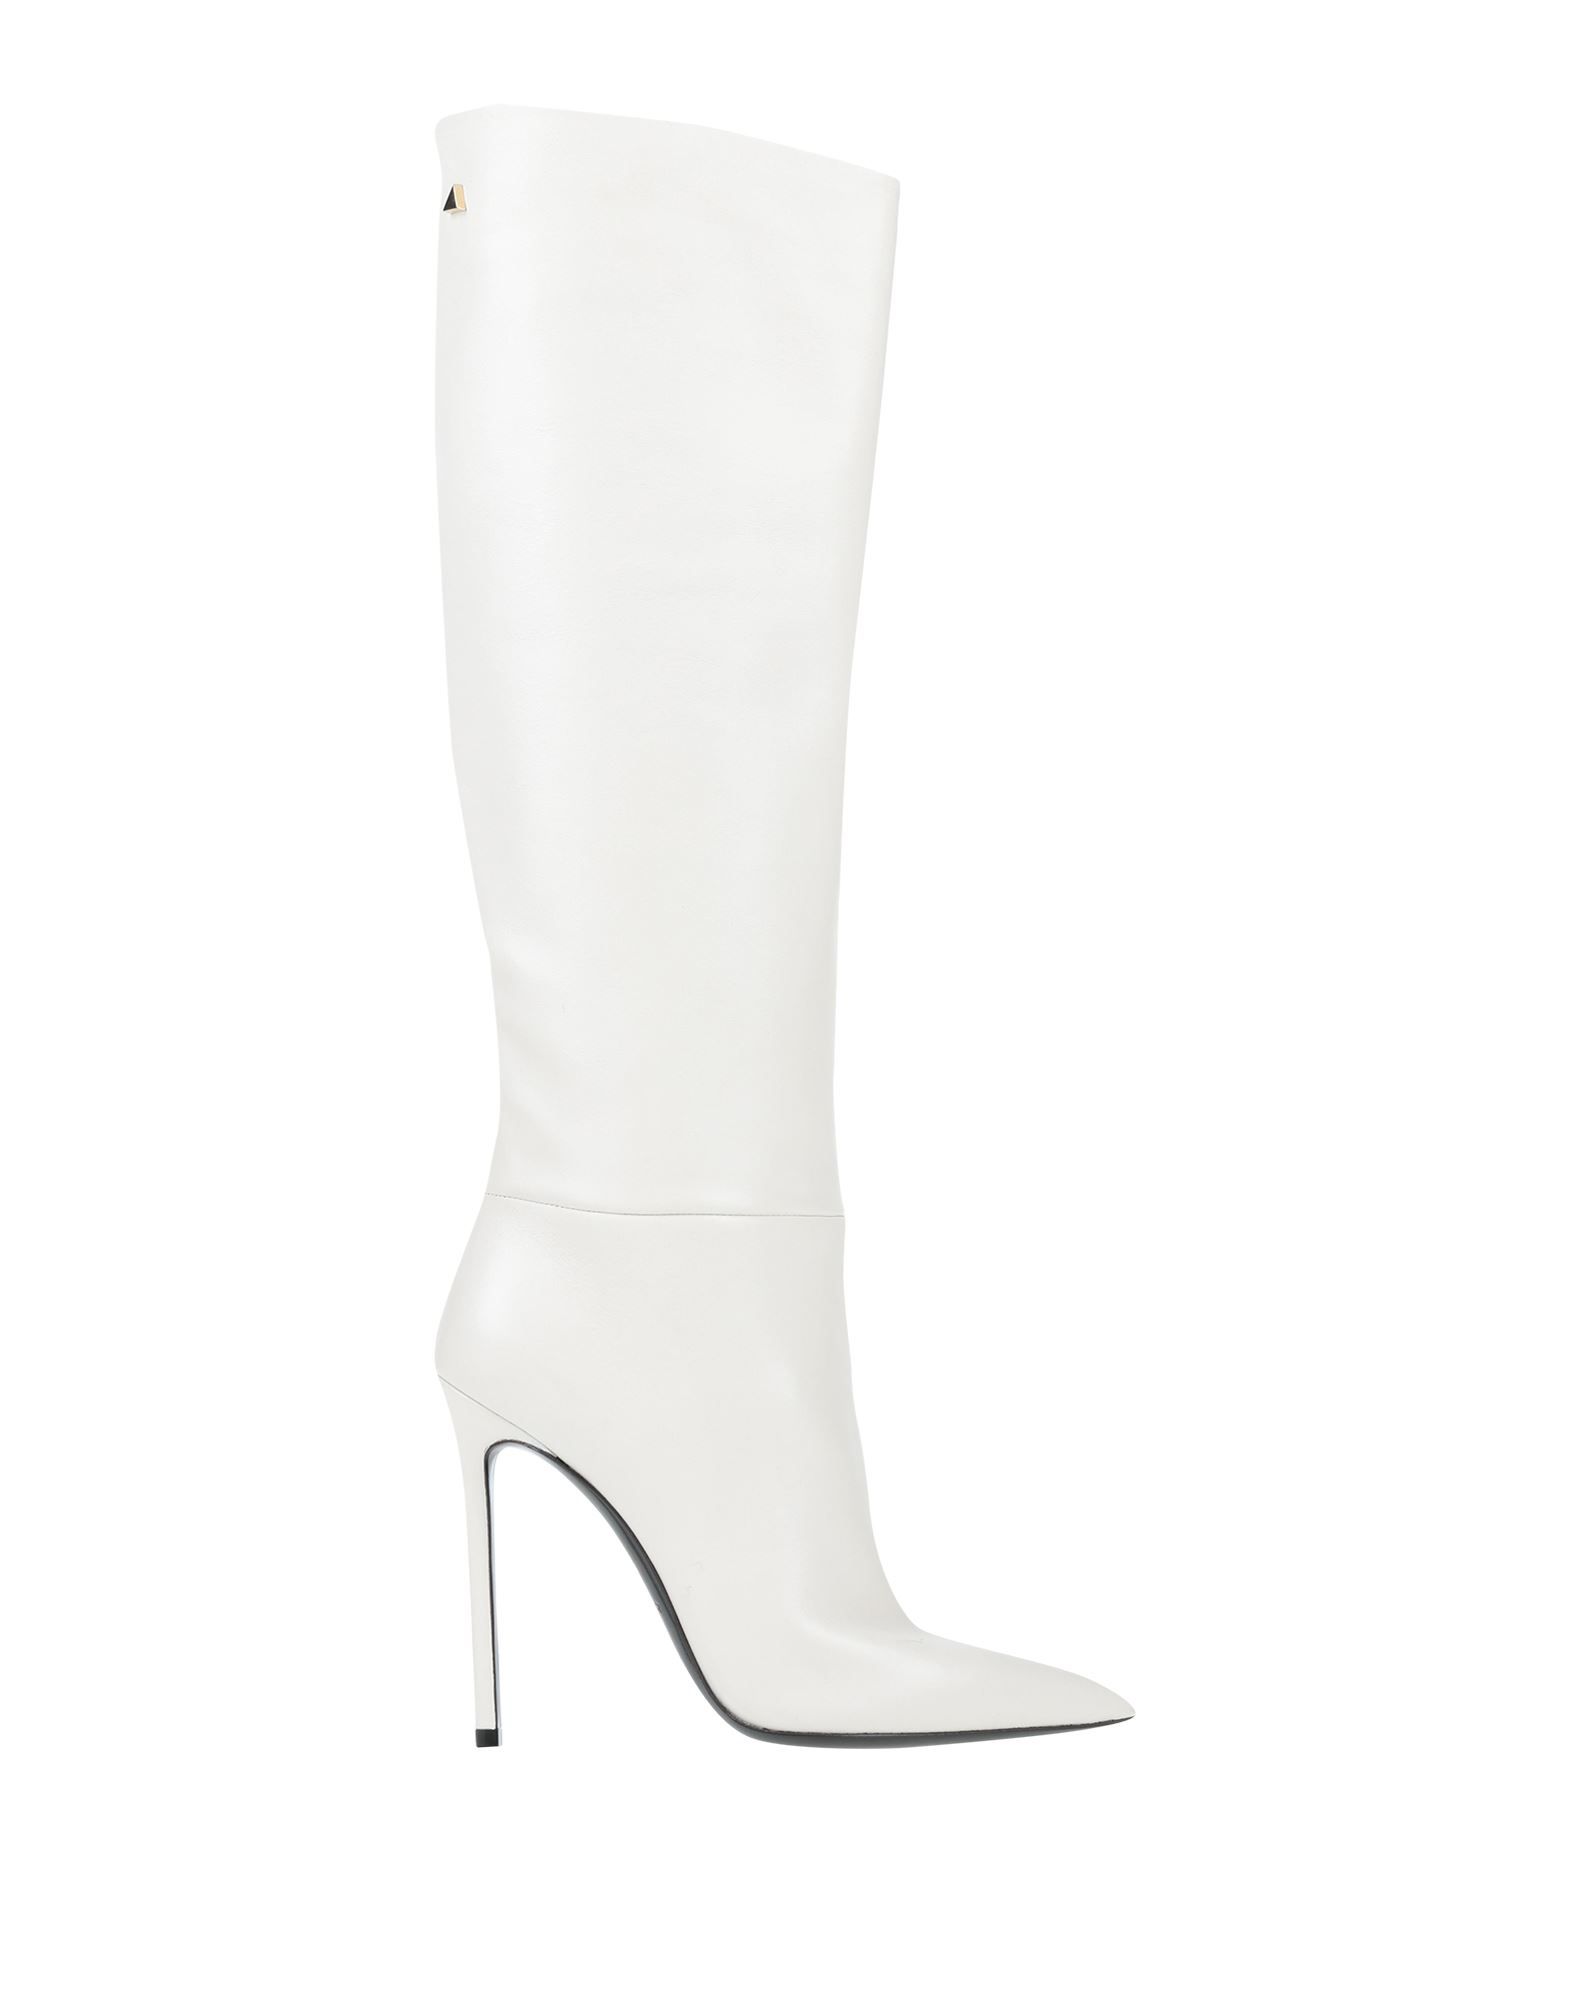 GREYMER GREY MER WOMAN KNEE BOOTS WHITE SIZE 8 SOFT LEATHER